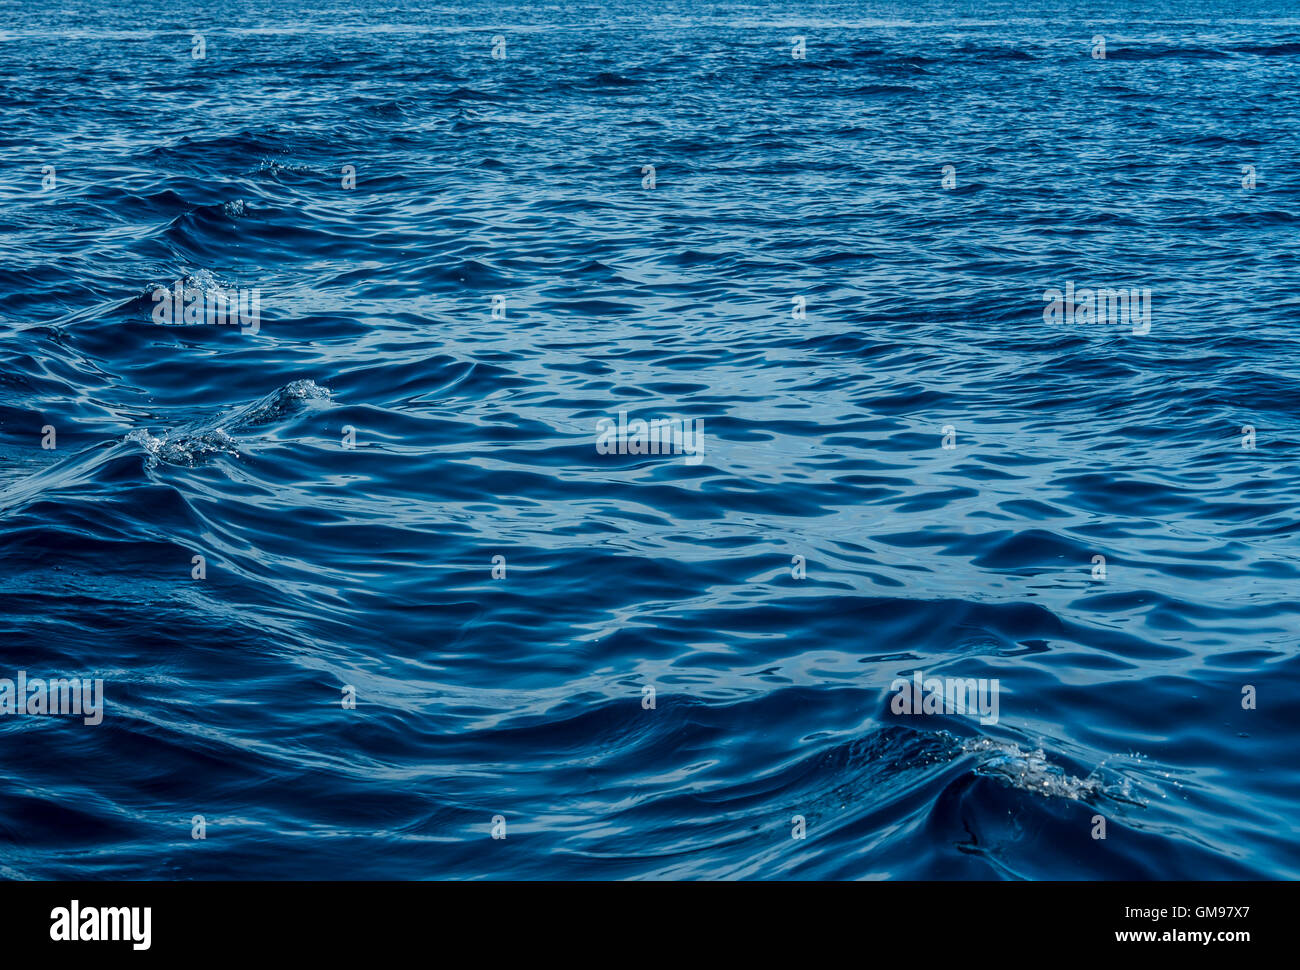 Mediterranean Sea, water surface and waves Stock Photo